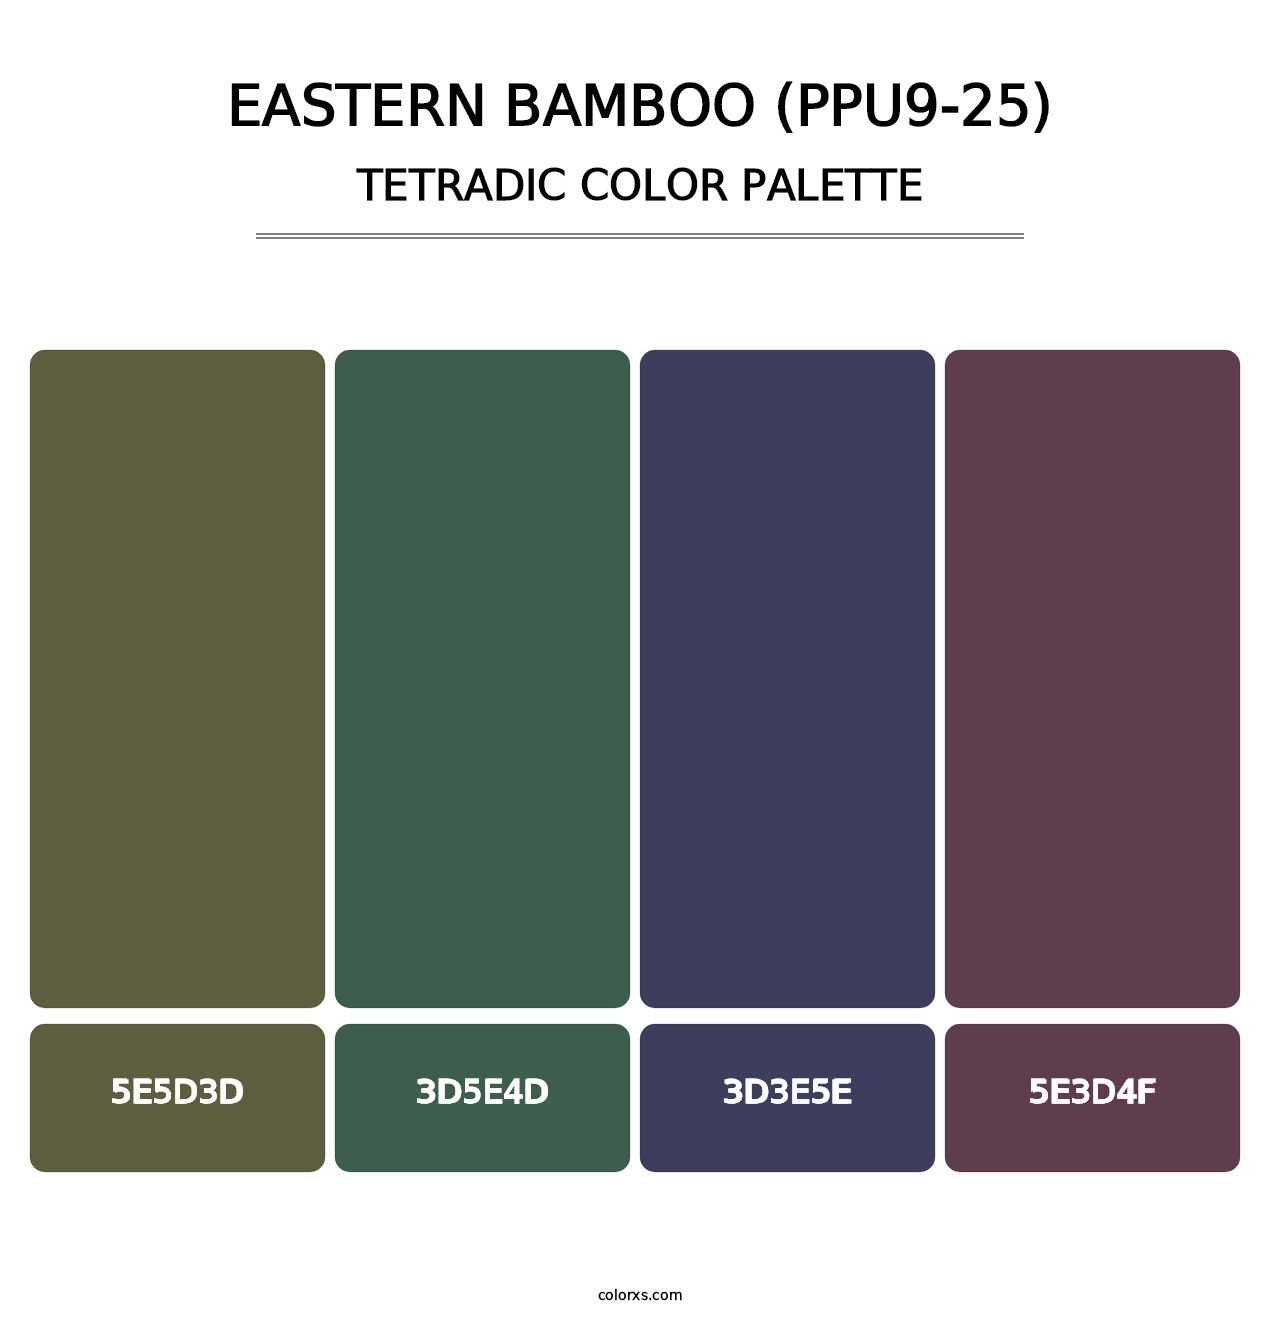 Eastern Bamboo (PPU9-25) - Tetradic Color Palette